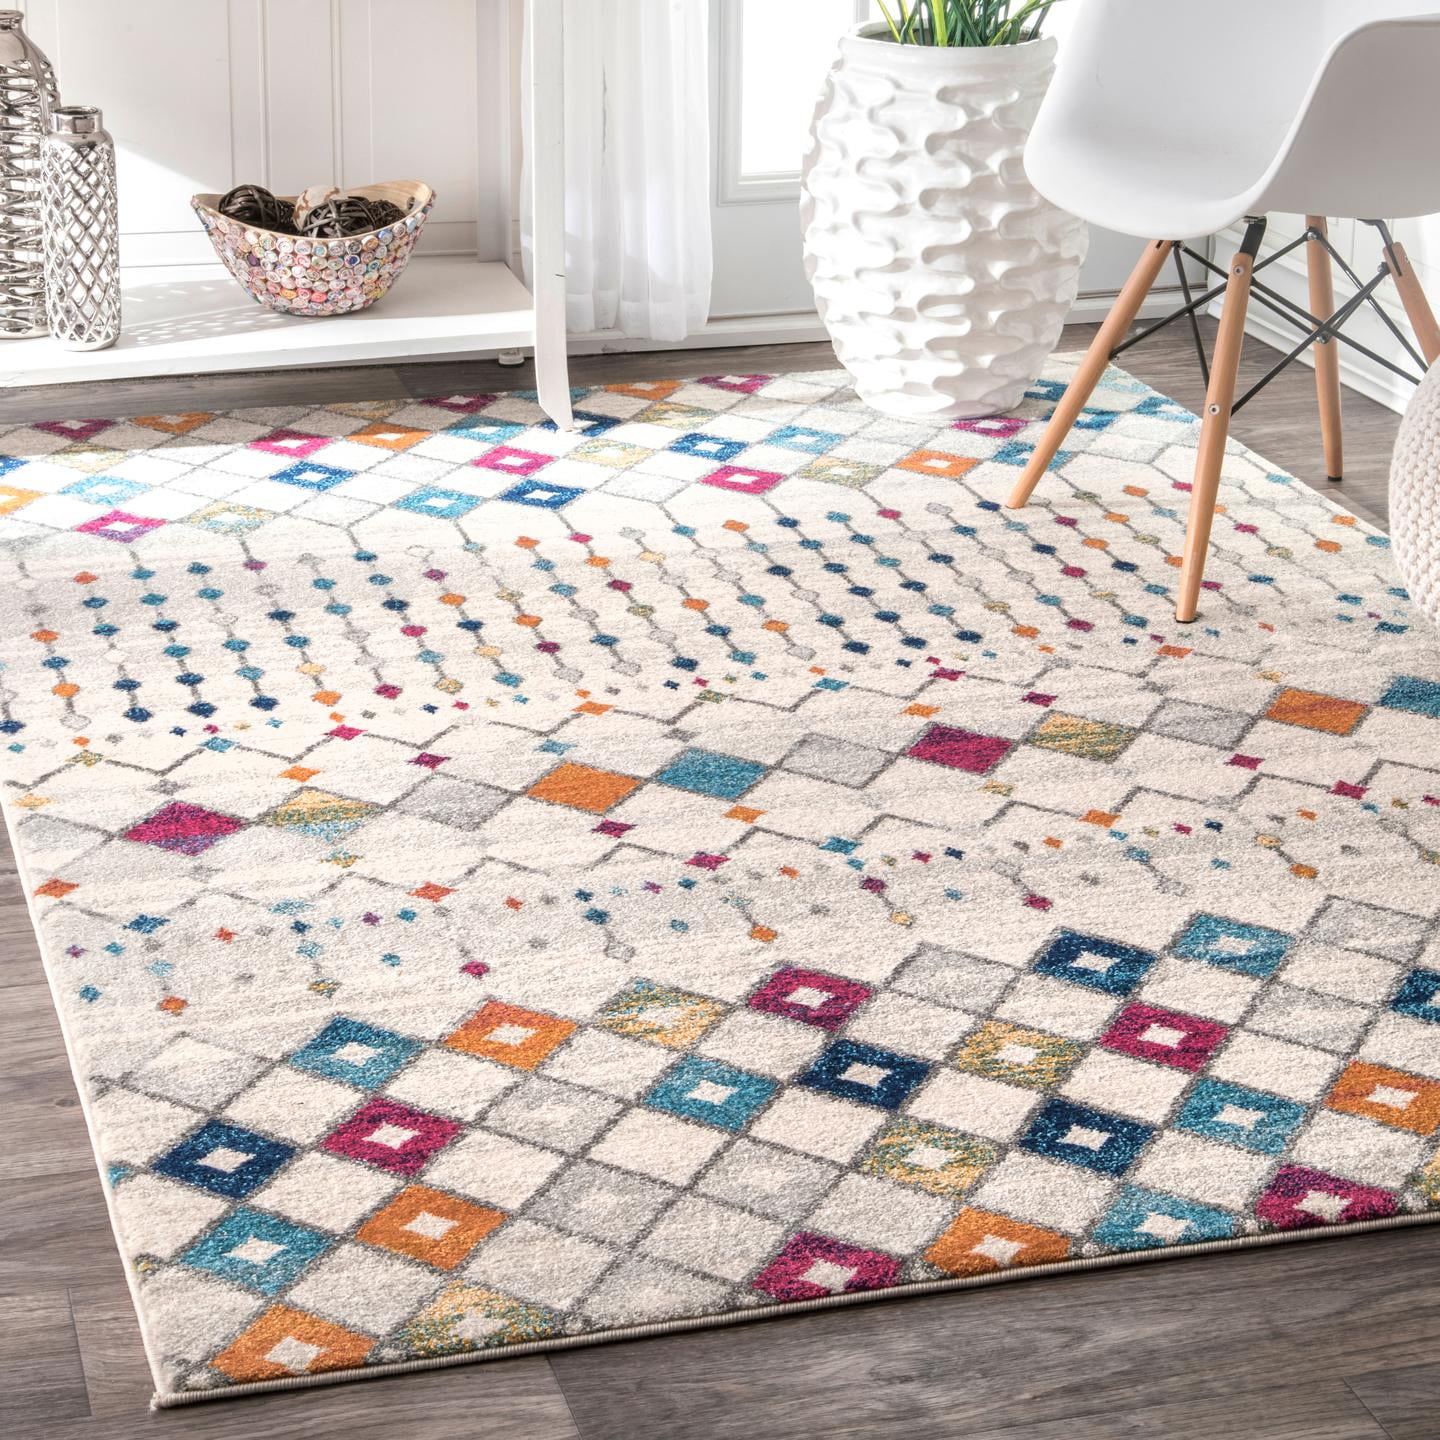 Grey/Off-white 5' x 7' 5 nuLOOM Moroccan Blythe Area Rug